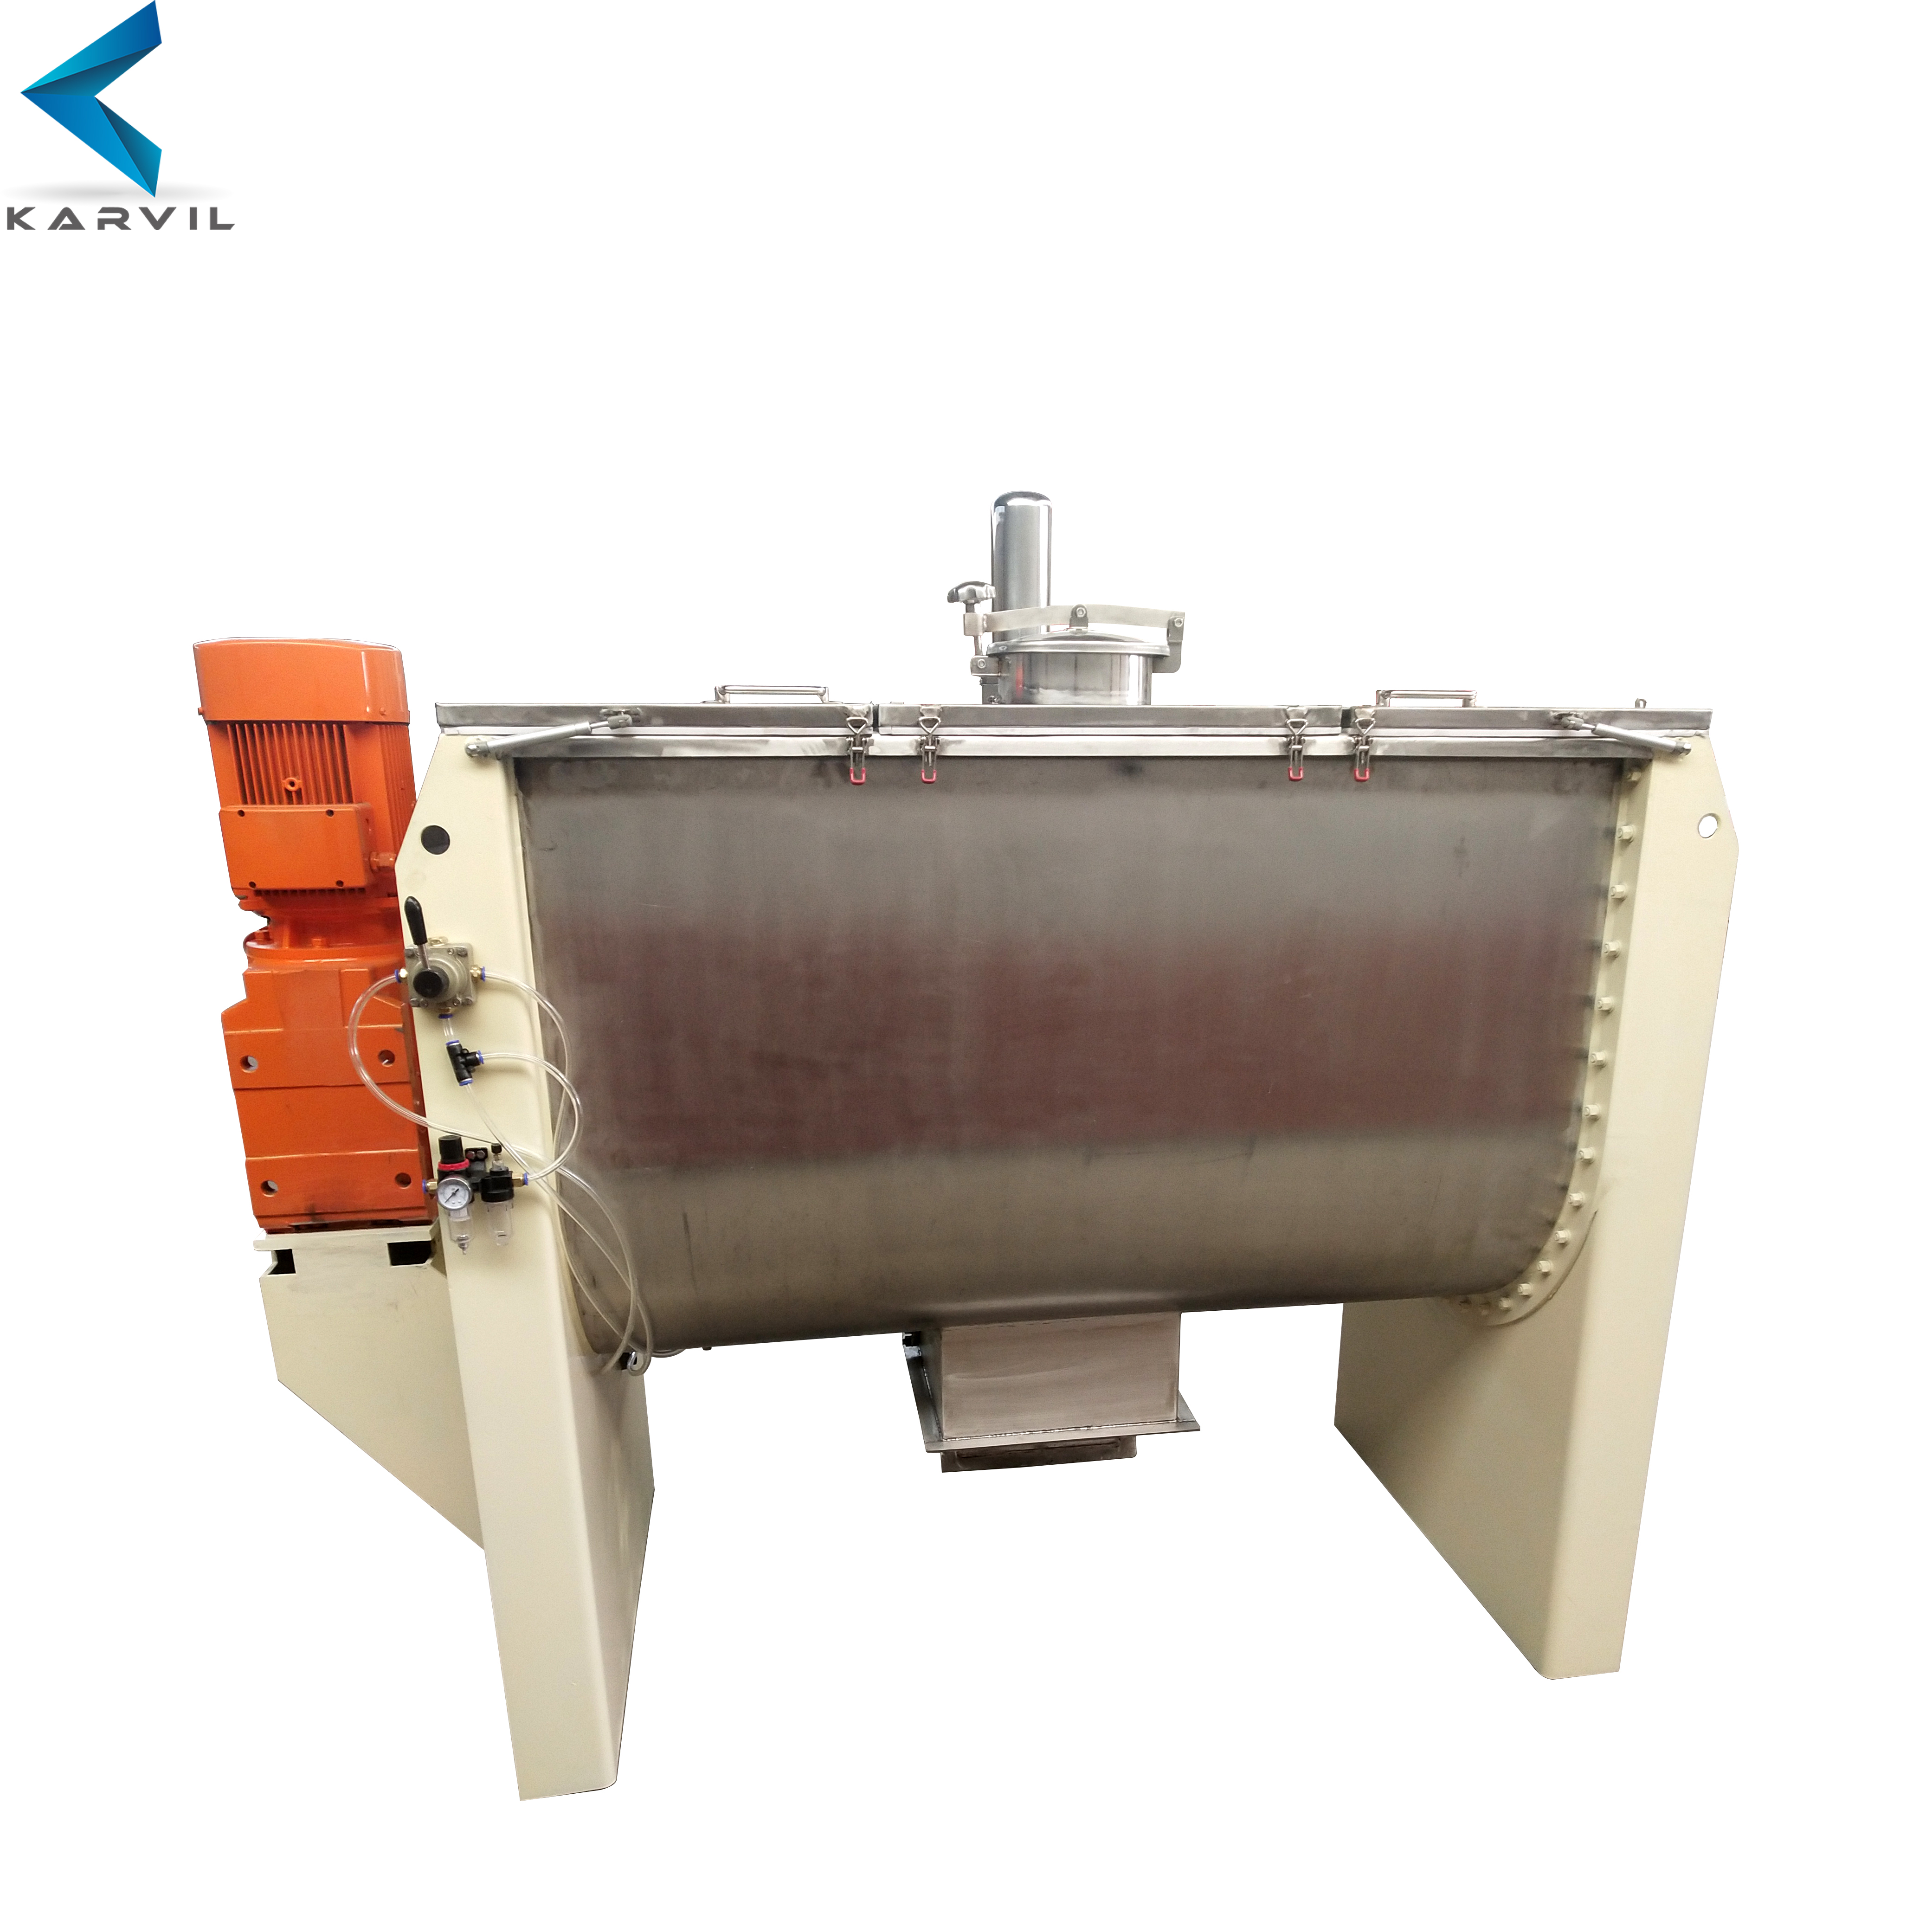 KARVIL stainless steel horizontal ribbon mixer with spray